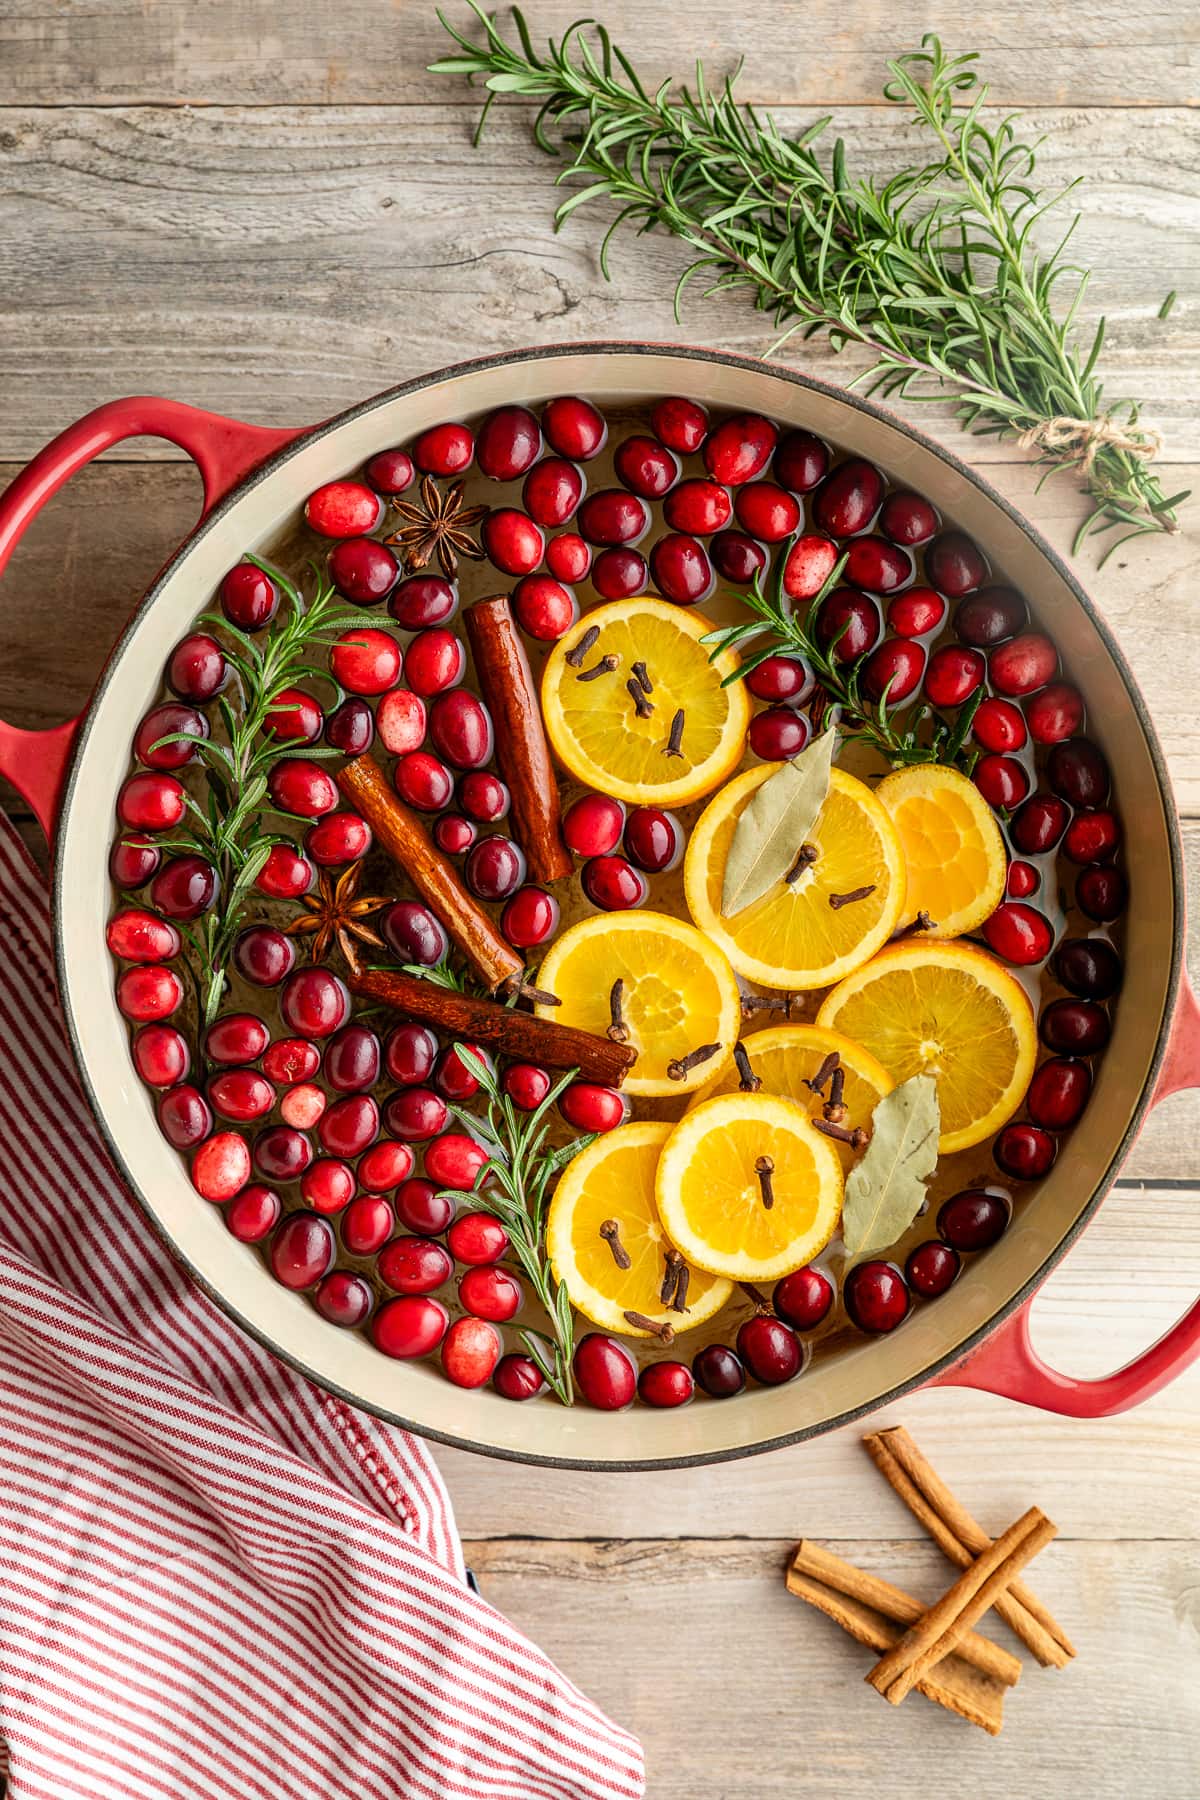 Simmer pot in Dutch oven filled with cranberries, orange slices, whole cloves, cinnamon sticks, star anise, rosemary stems, and bay leaf.